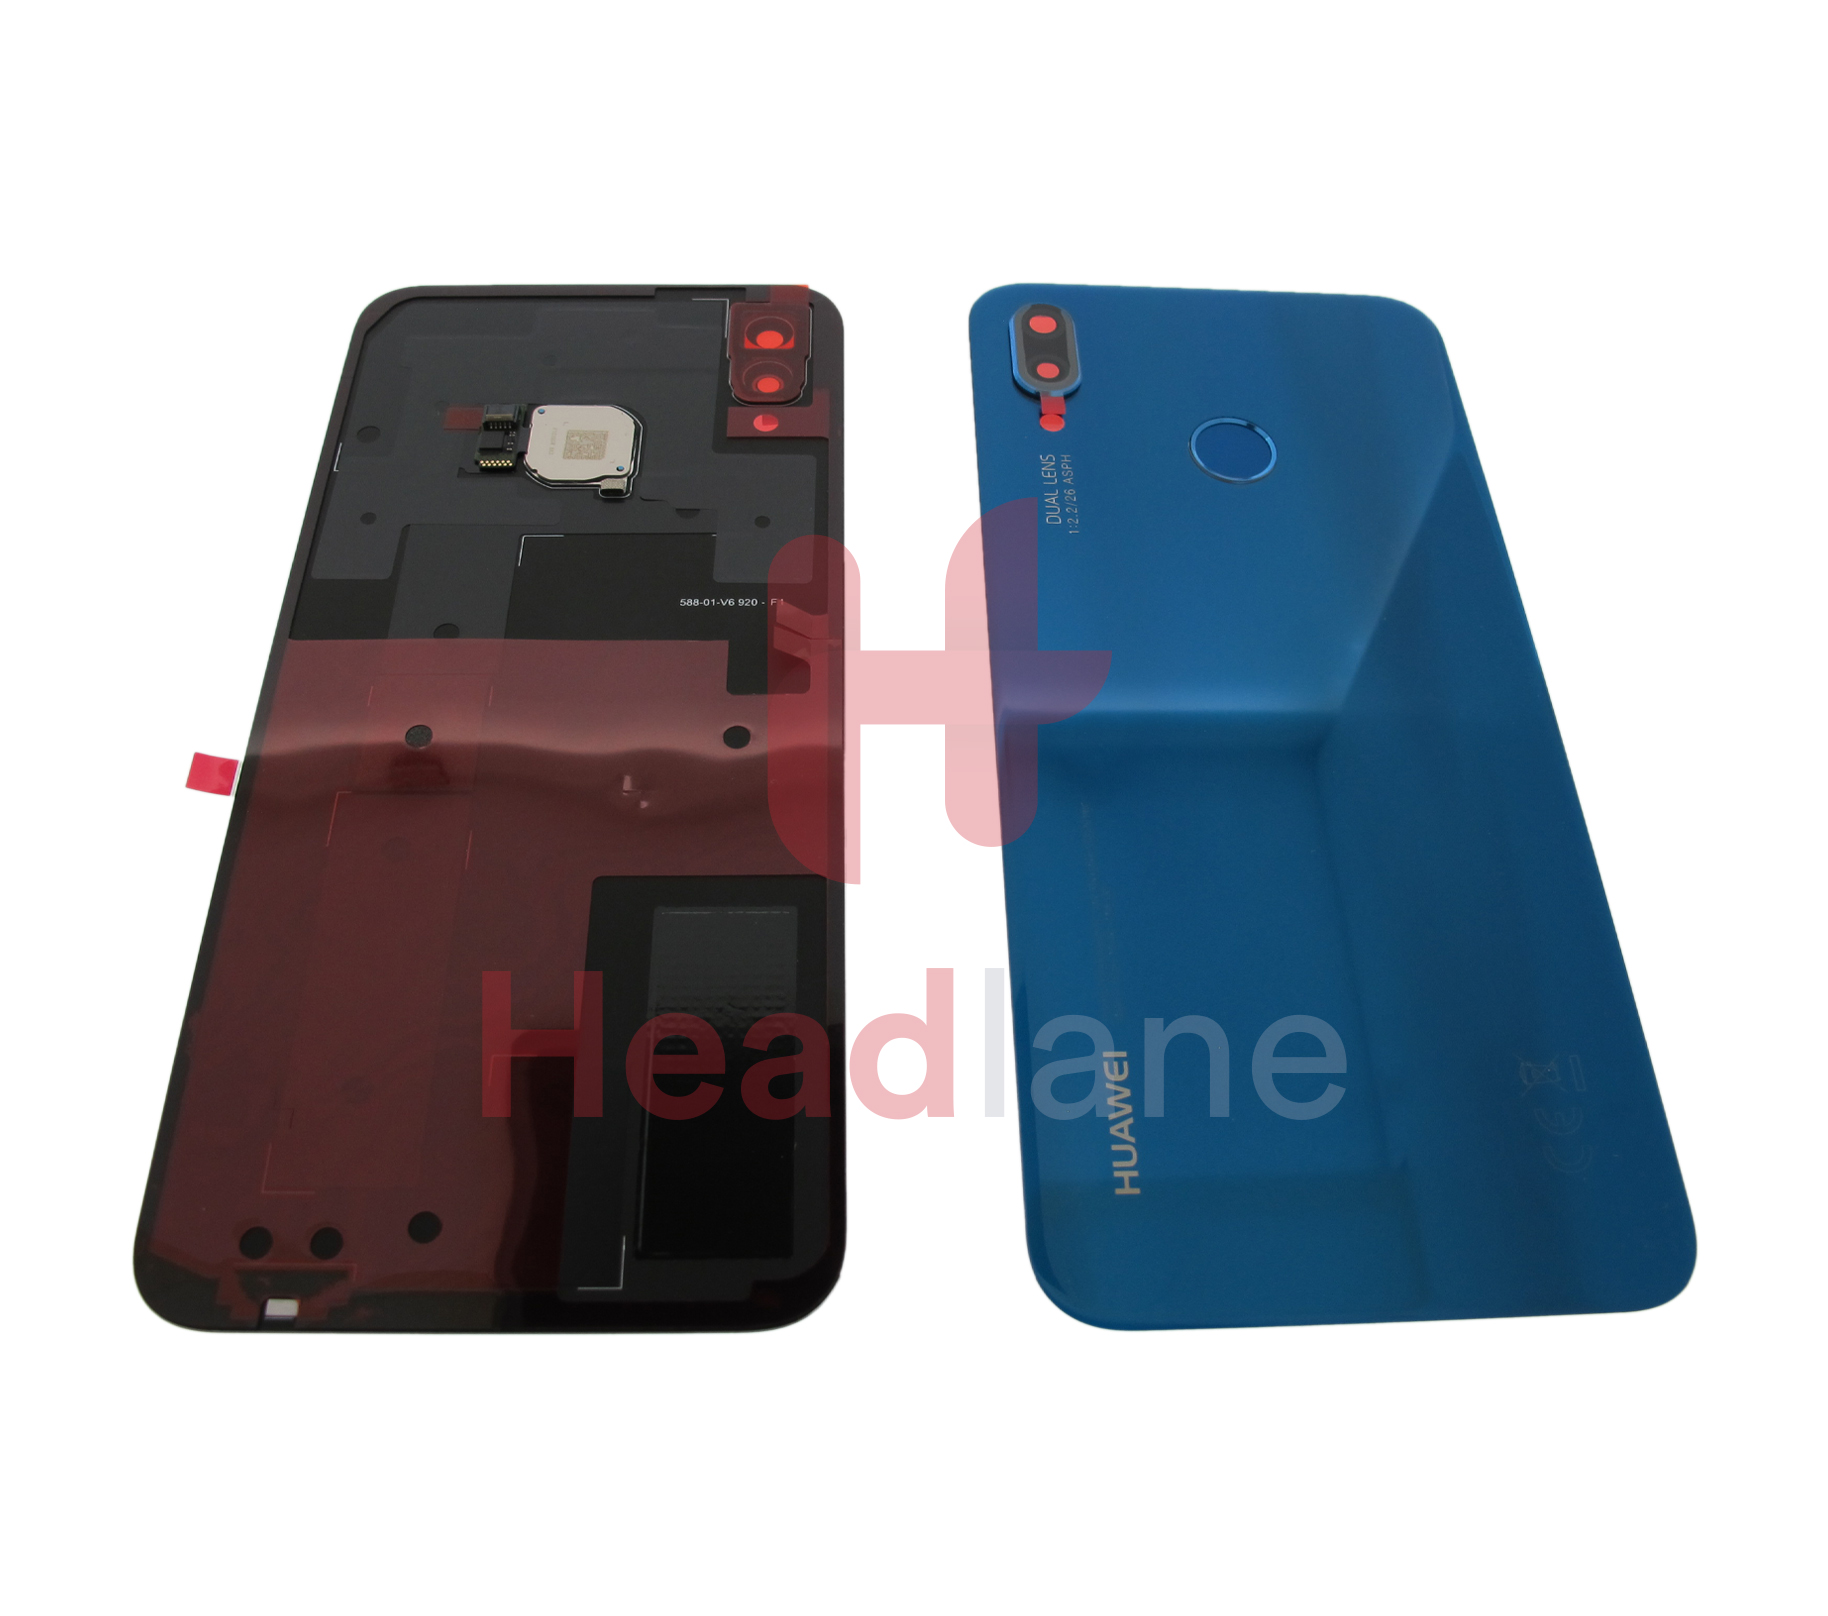 Huawei P20 Lite Back / Battery Cover - Blue